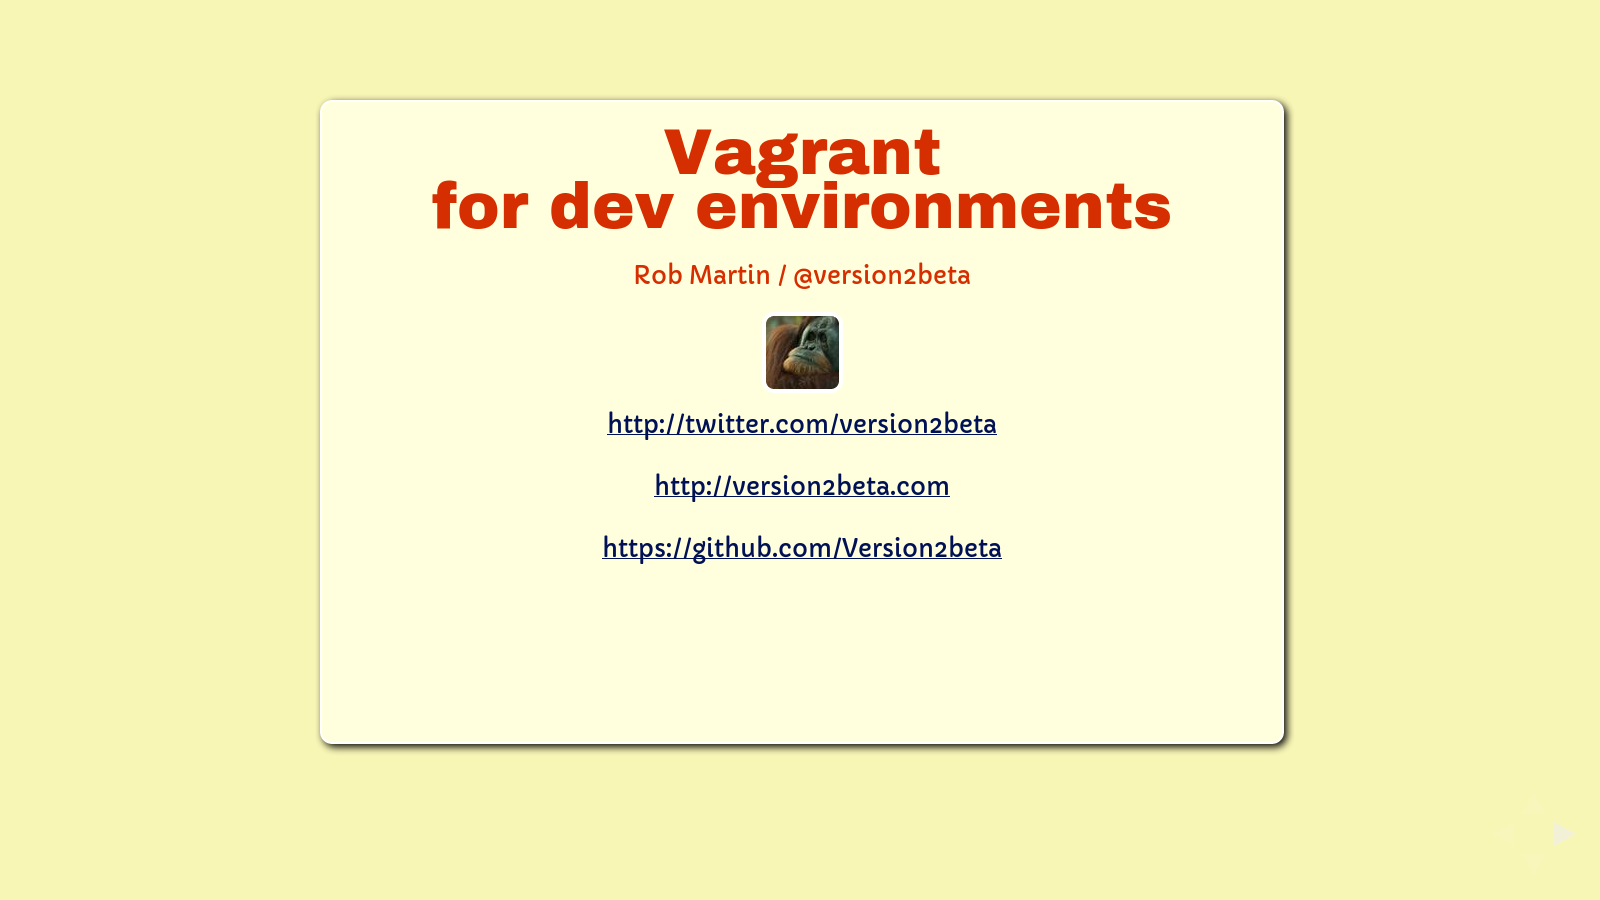 Slide: @version2beta and contact info